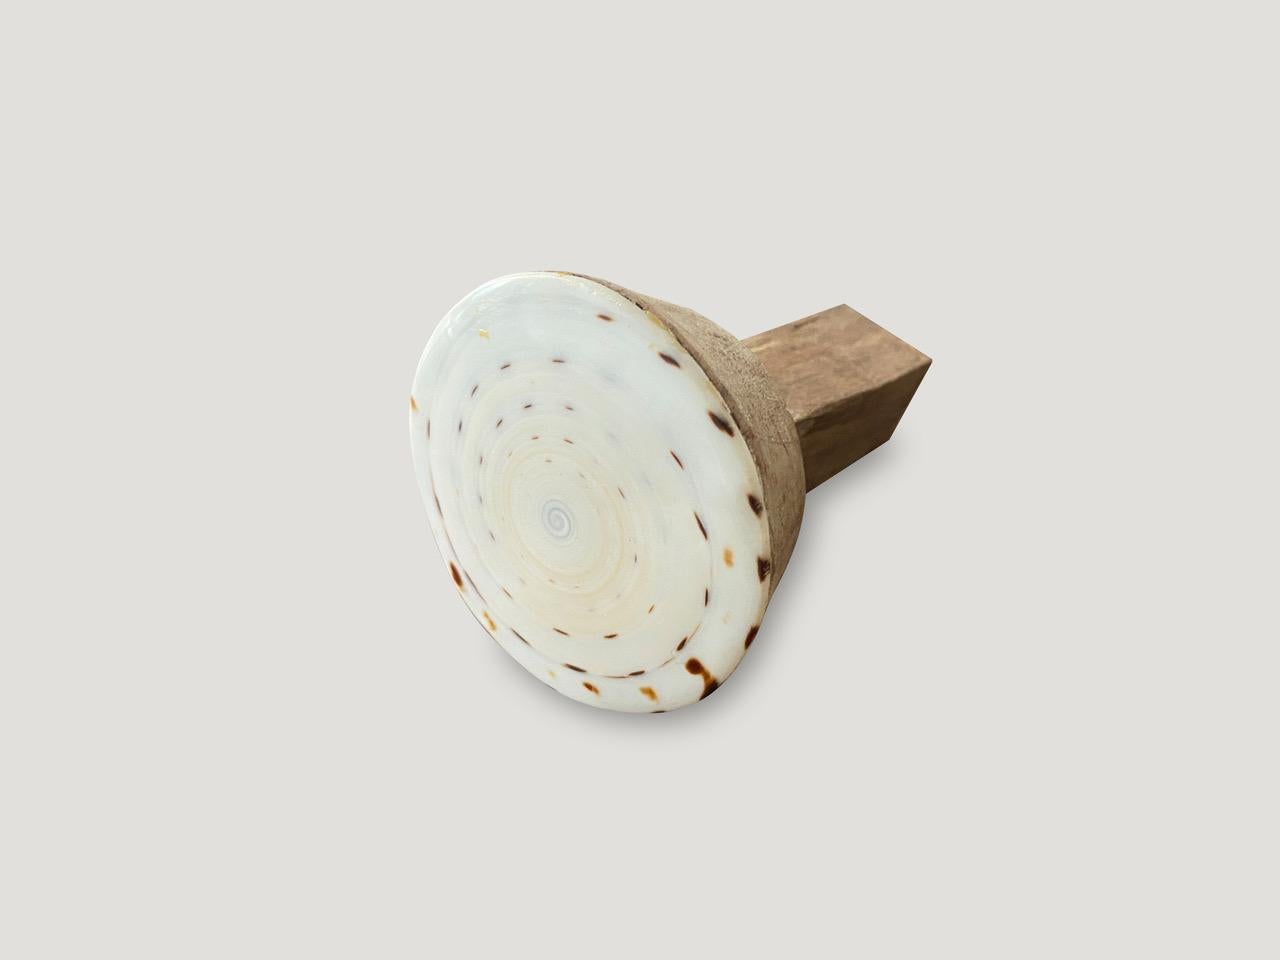 We have taken the flat bottom section of a cone shaped shell and added teak wood for beautiful one of a kind door knobs. We have a collection. Great installed in bathrooms, kitchens or on cabinets as shown in the last image. The price reflects